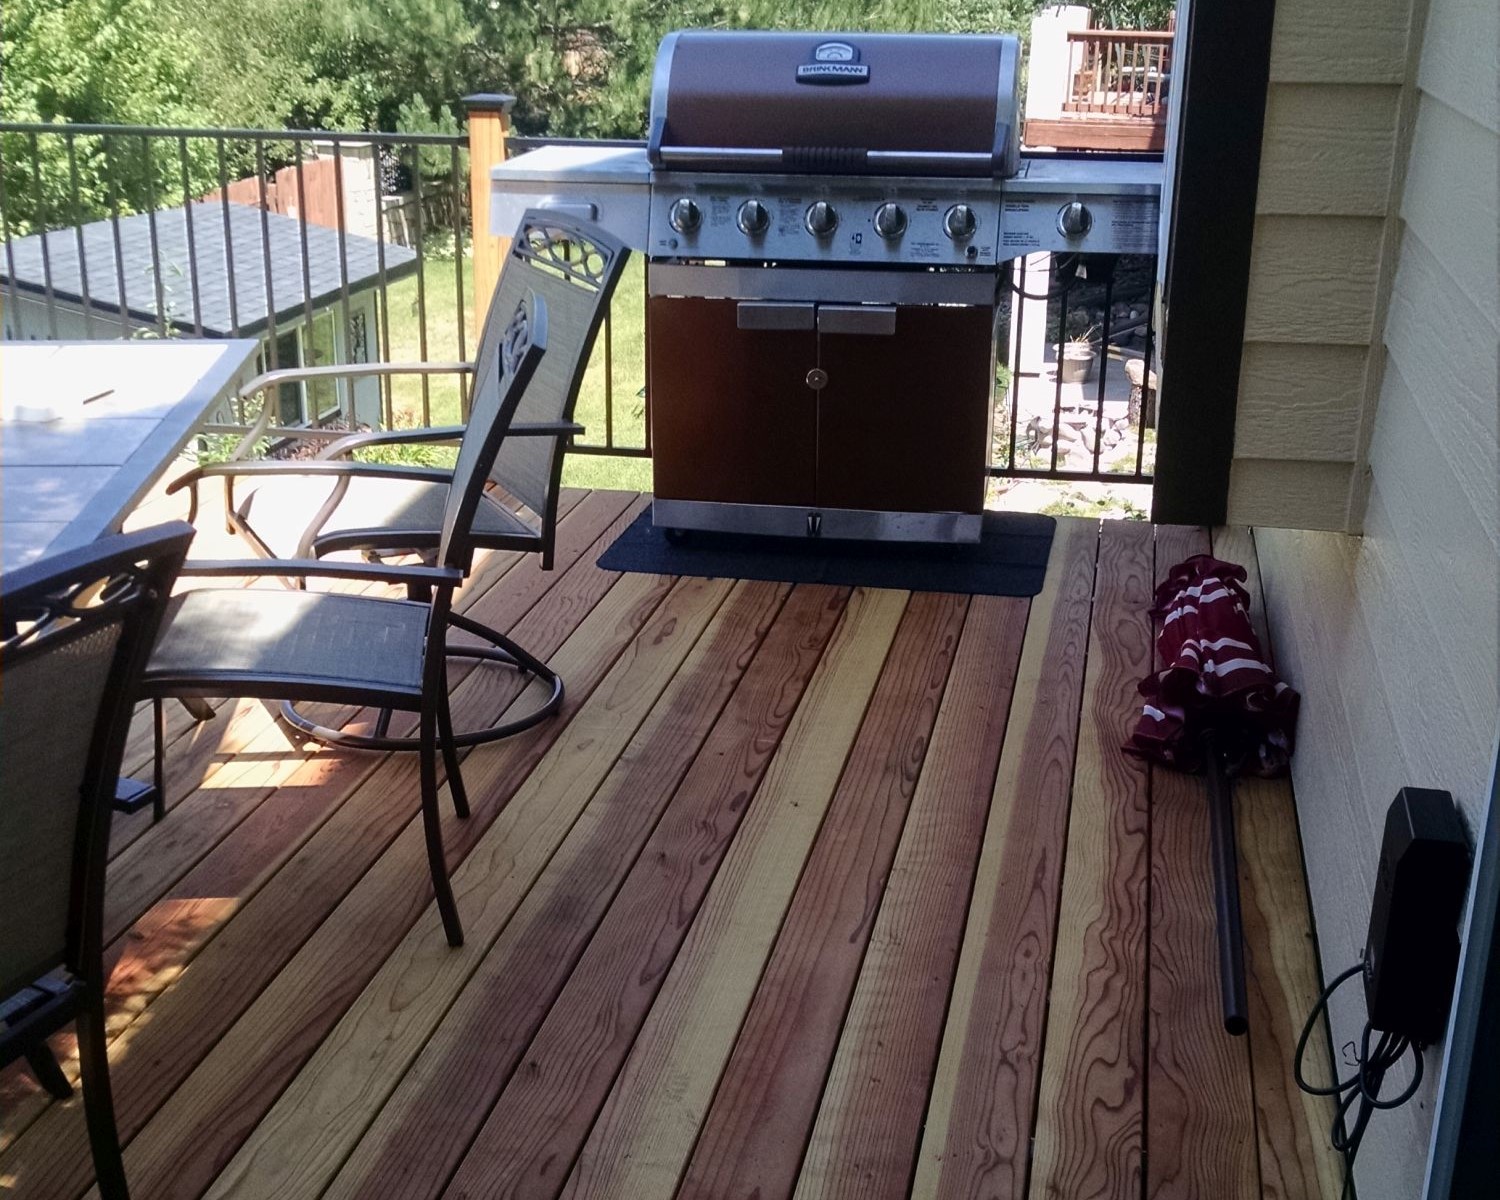 B-Grade redwood deck with the boards laid at 90-degrees. The railing is wood posts with metal panels between them.